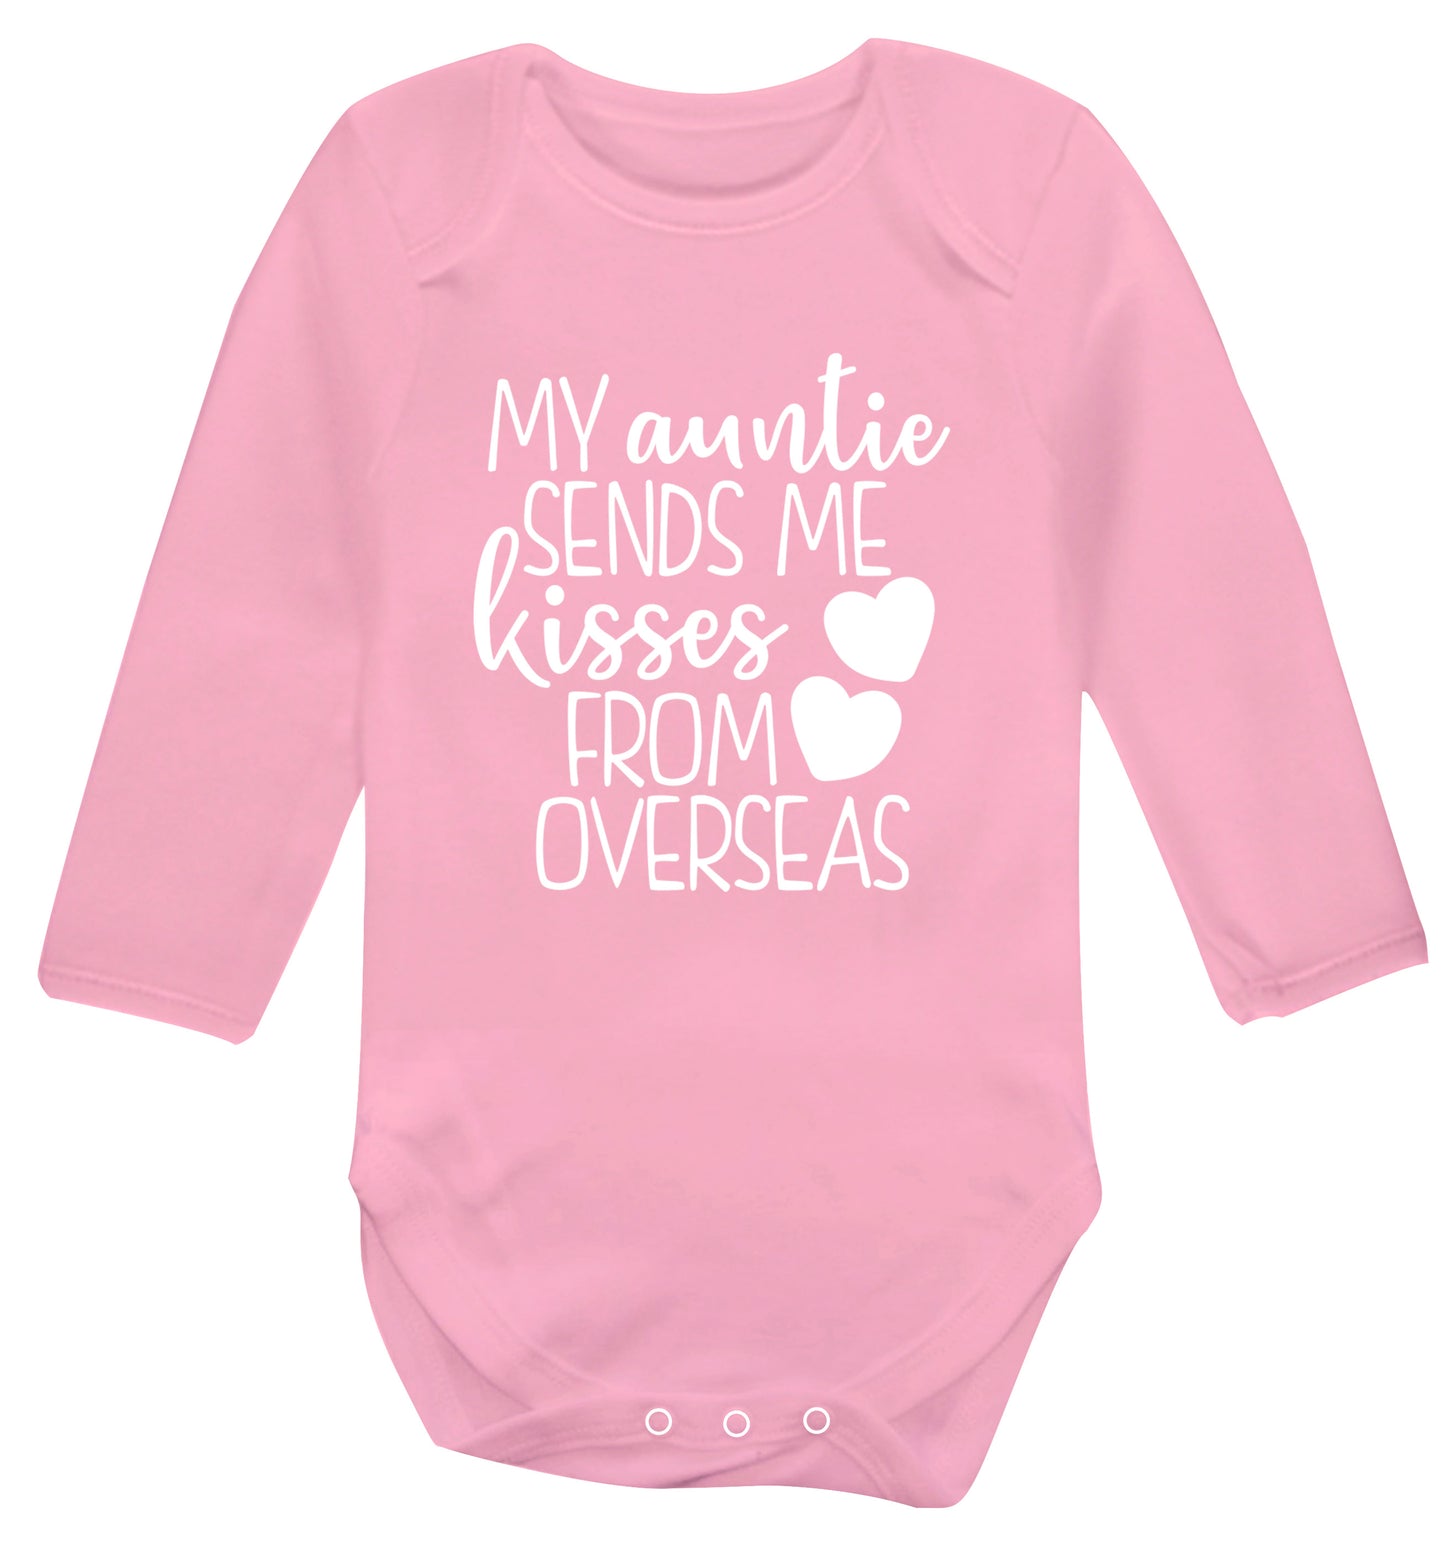 My auntie sends me kisses from overseas Baby Vest long sleeved pale pink 6-12 months